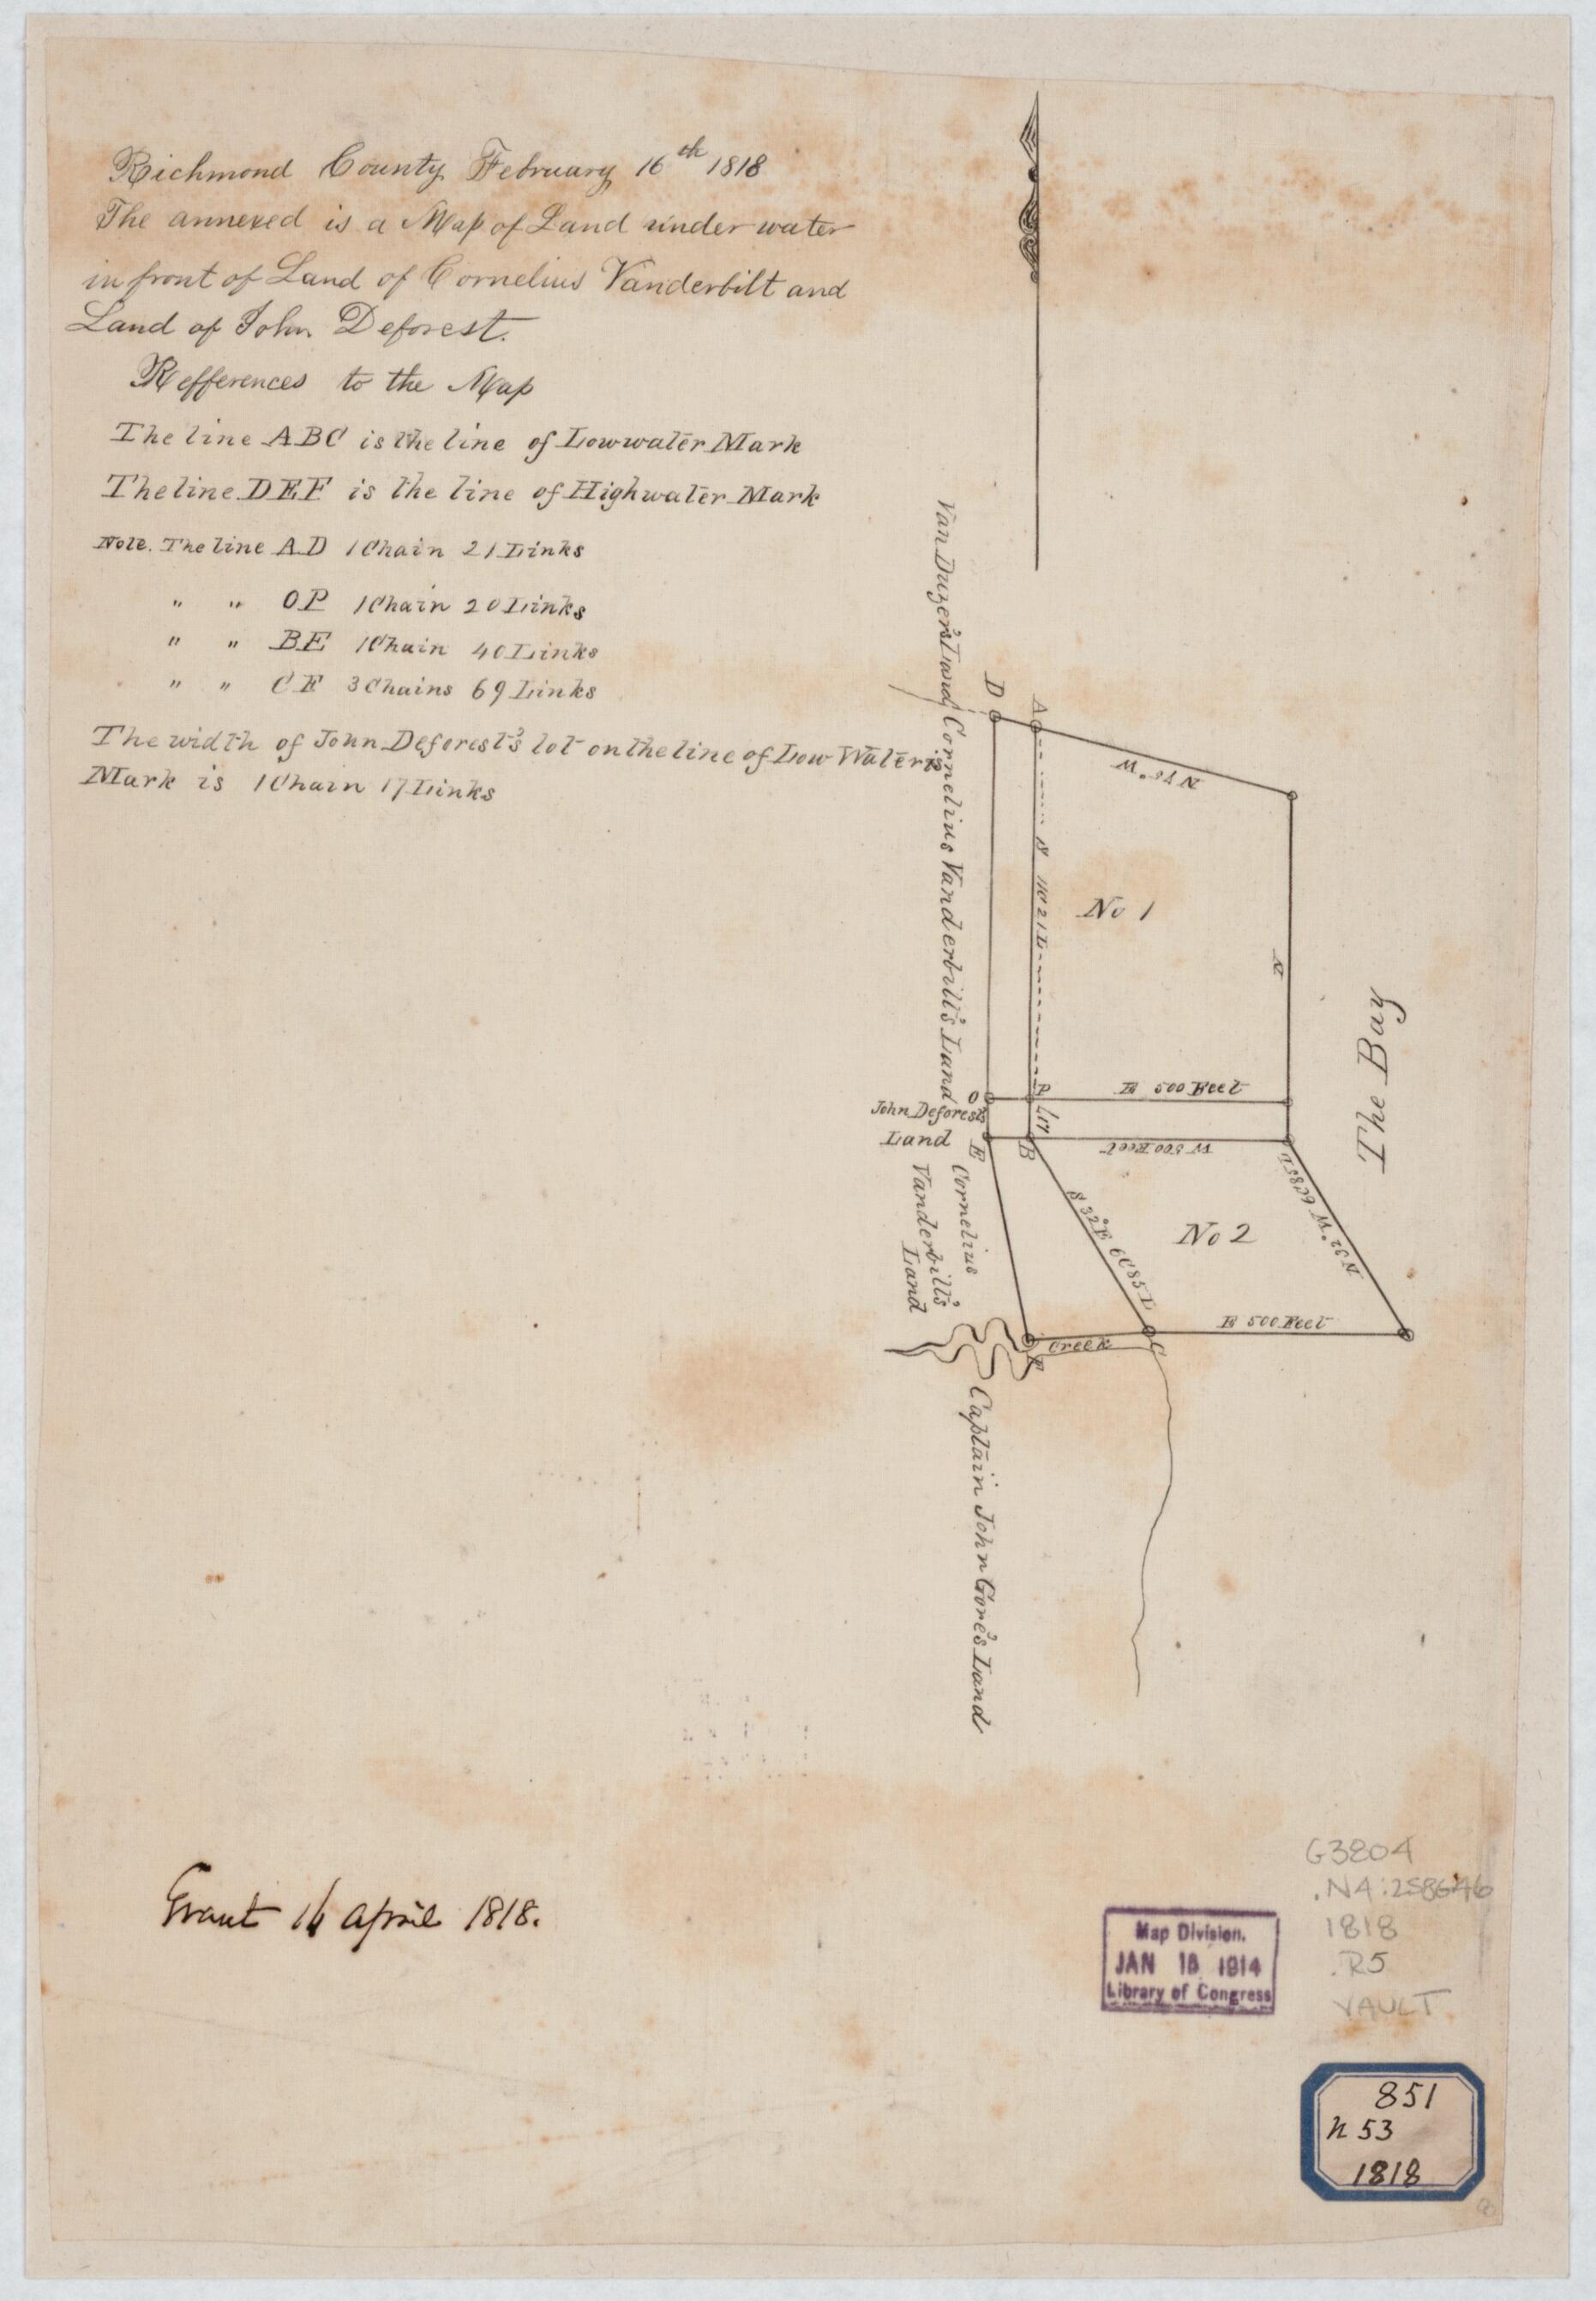 This old map of Richmond County, February 16th from 1818 : the Annexed Is a Map of Land Under Water In Front of Land of Cornelius Vanderbilt and Land of John Deforest was created by  U.S. Coast and Geodetic Survey, Cornelius Vanderbilt in 1818